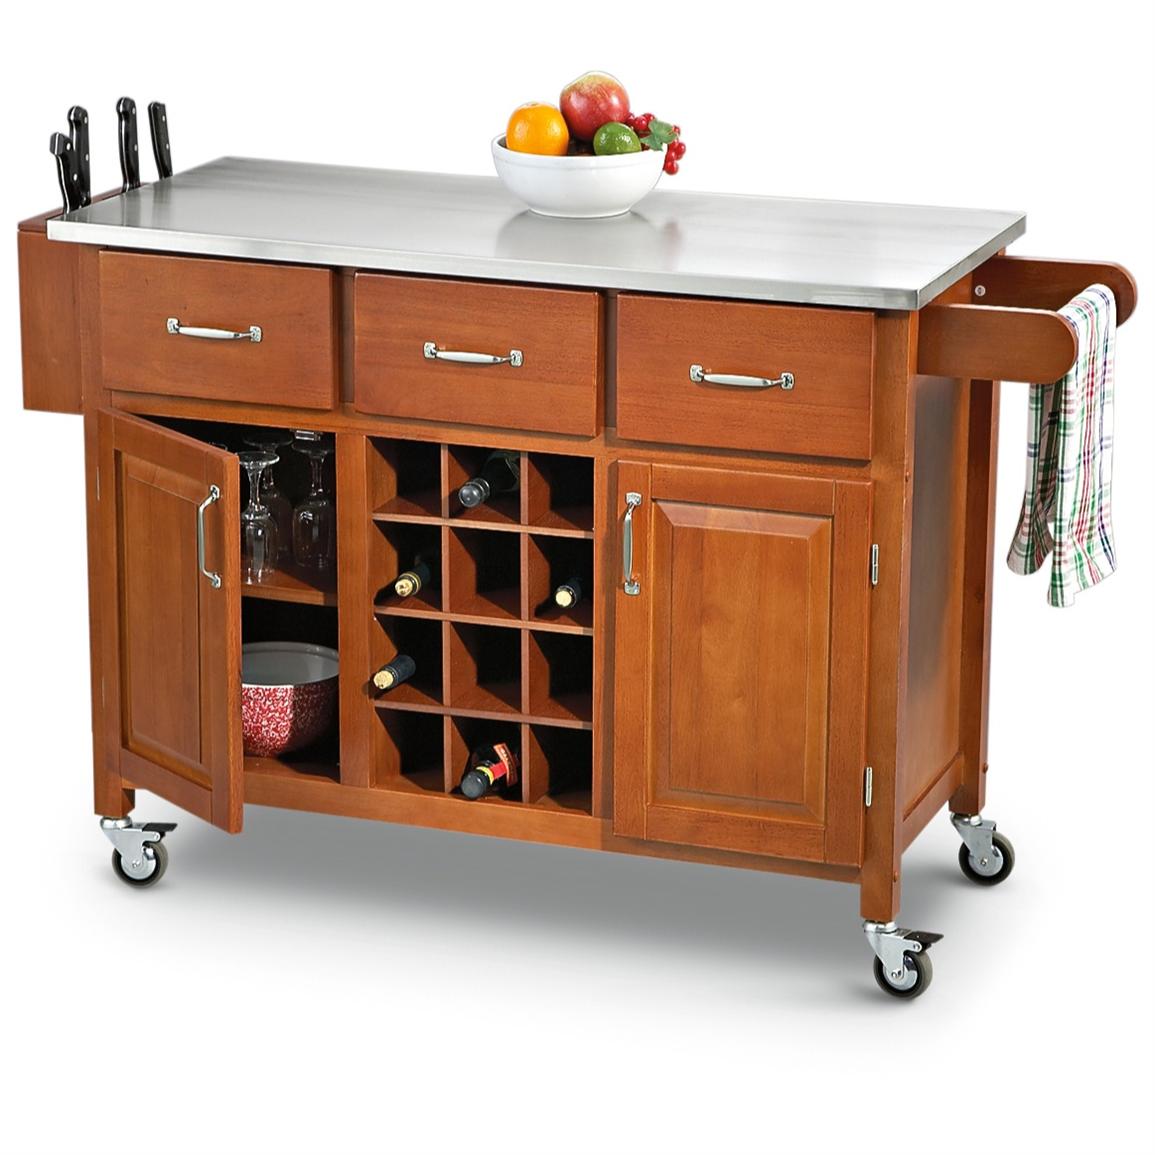 Stainless Steel - top Rolling Kitchen Cart - 203777, Kitchen & Dining Kitchen Cart With Stainless Steel Top